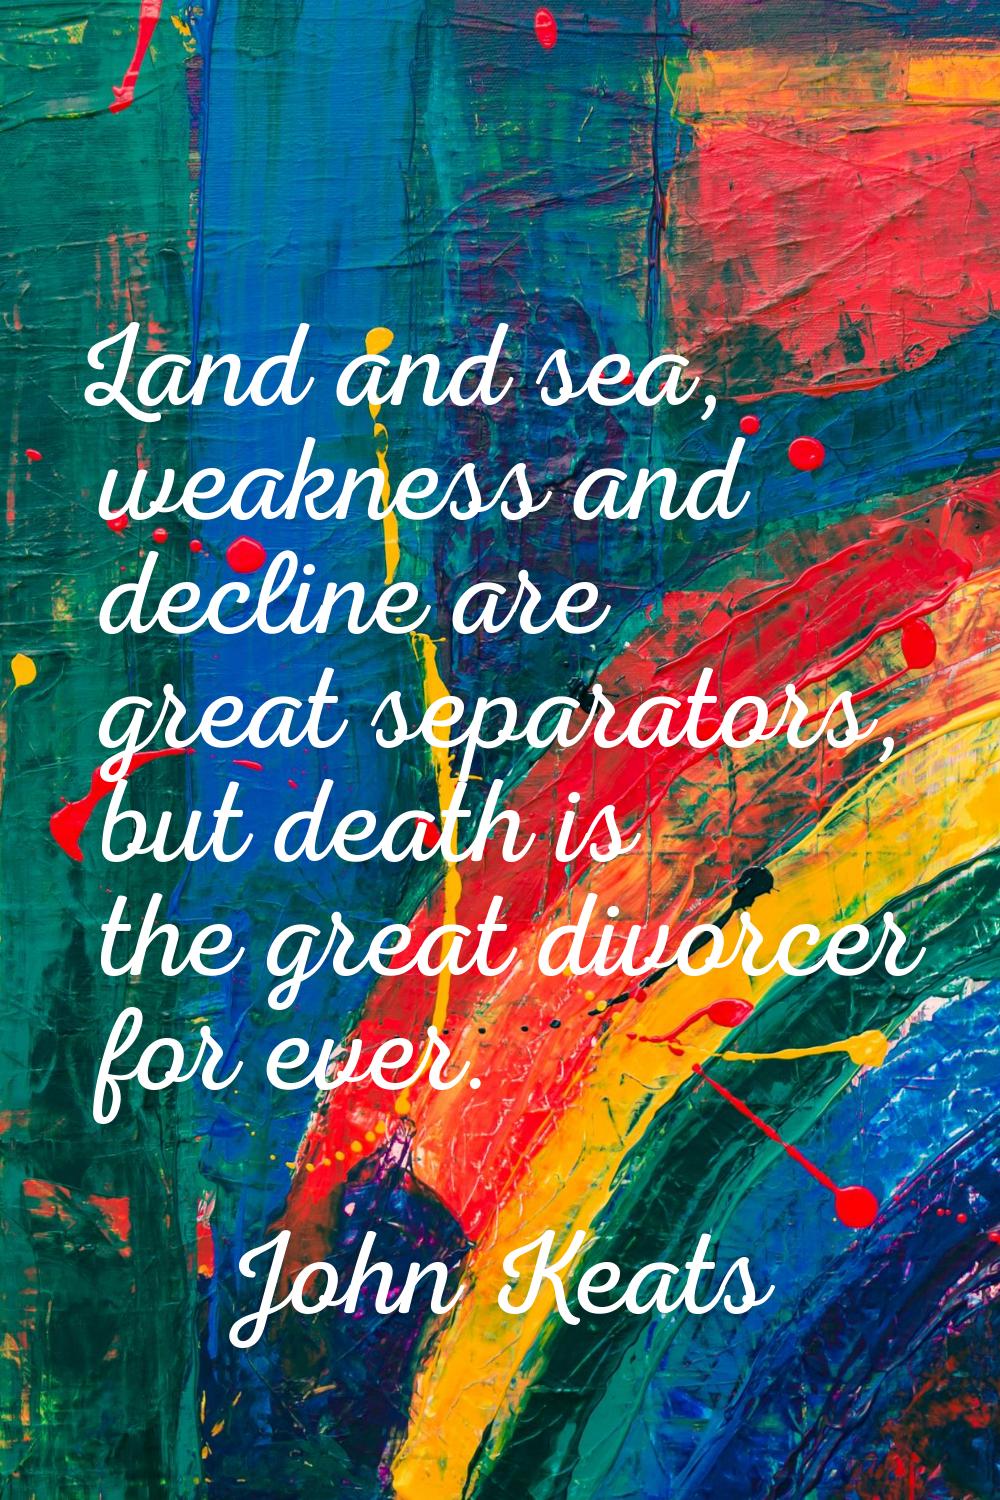 Land and sea, weakness and decline are great separators, but death is the great divorcer for ever.